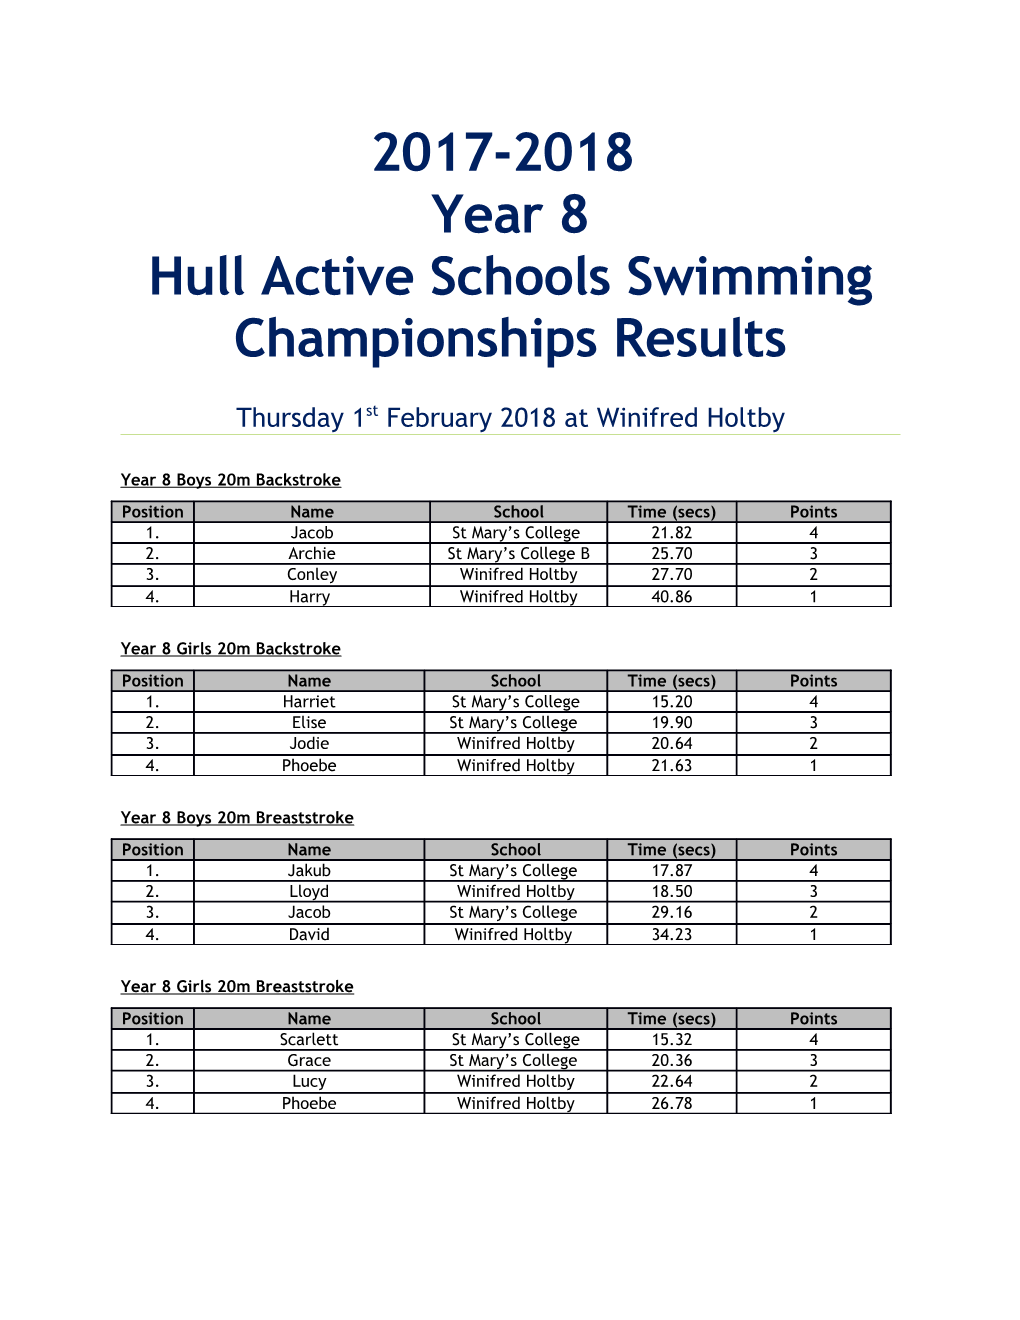 Hull Active Schools Swimming Championships Results